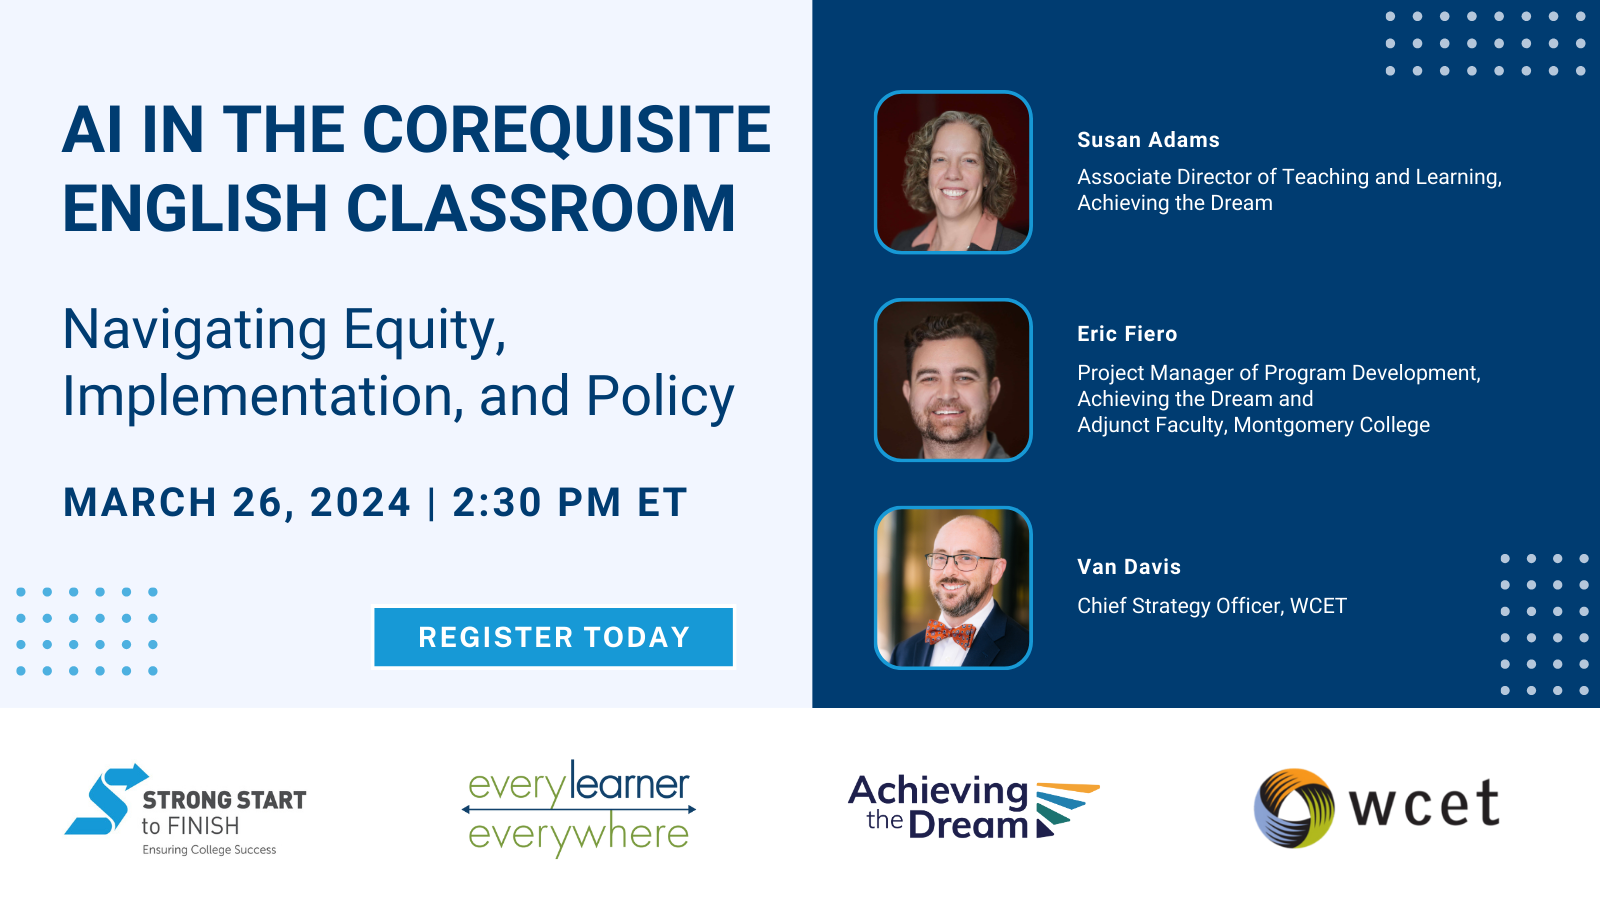 Webinar graphic for AI in the Corequisite English Classroom: Navigating Equity, Implementation, and Policy with session title, date, time, speaker photos and logos.